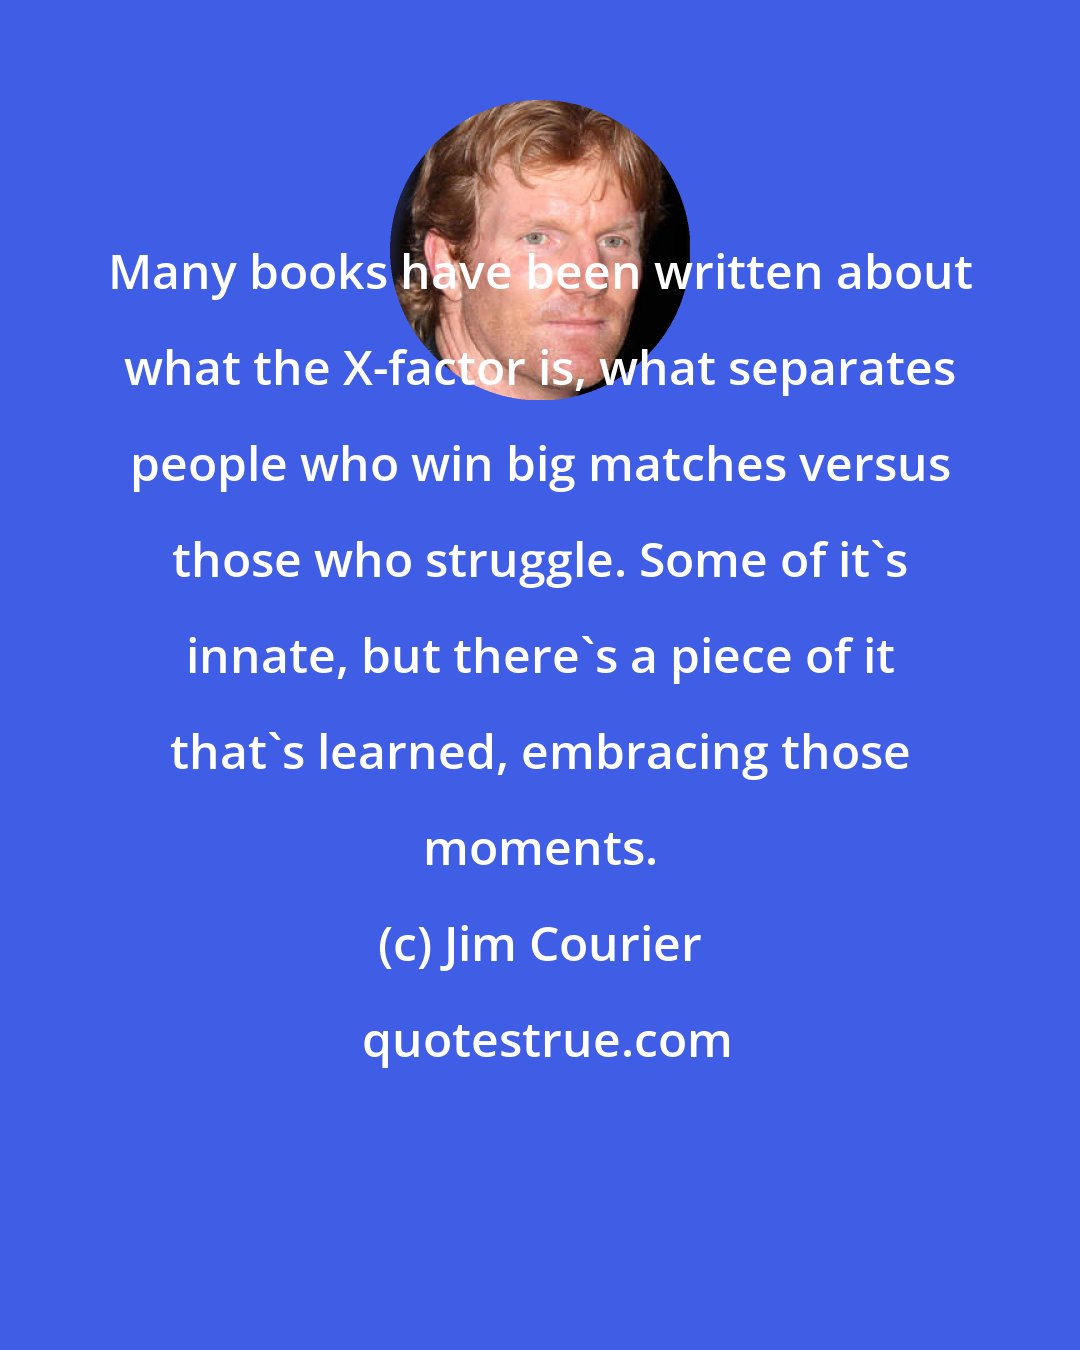 Jim Courier: Many books have been written about what the X-factor is, what separates people who win big matches versus those who struggle. Some of it's innate, but there's a piece of it that's learned, embracing those moments.